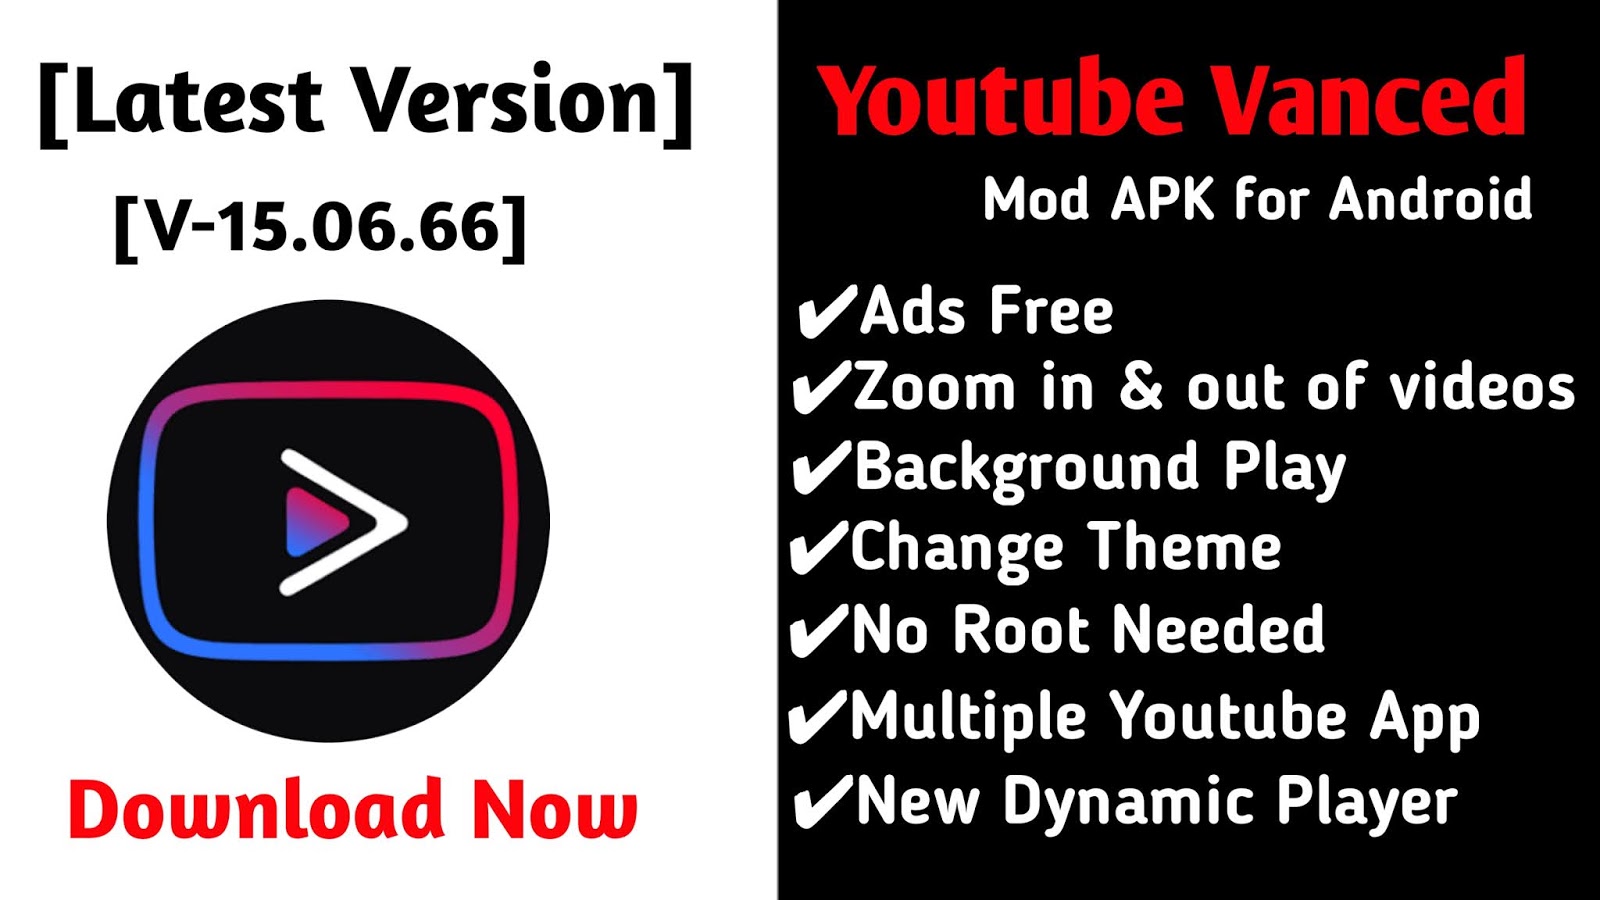 YouTube Premium Vanced Mod APK for Android  No root  2020 Free